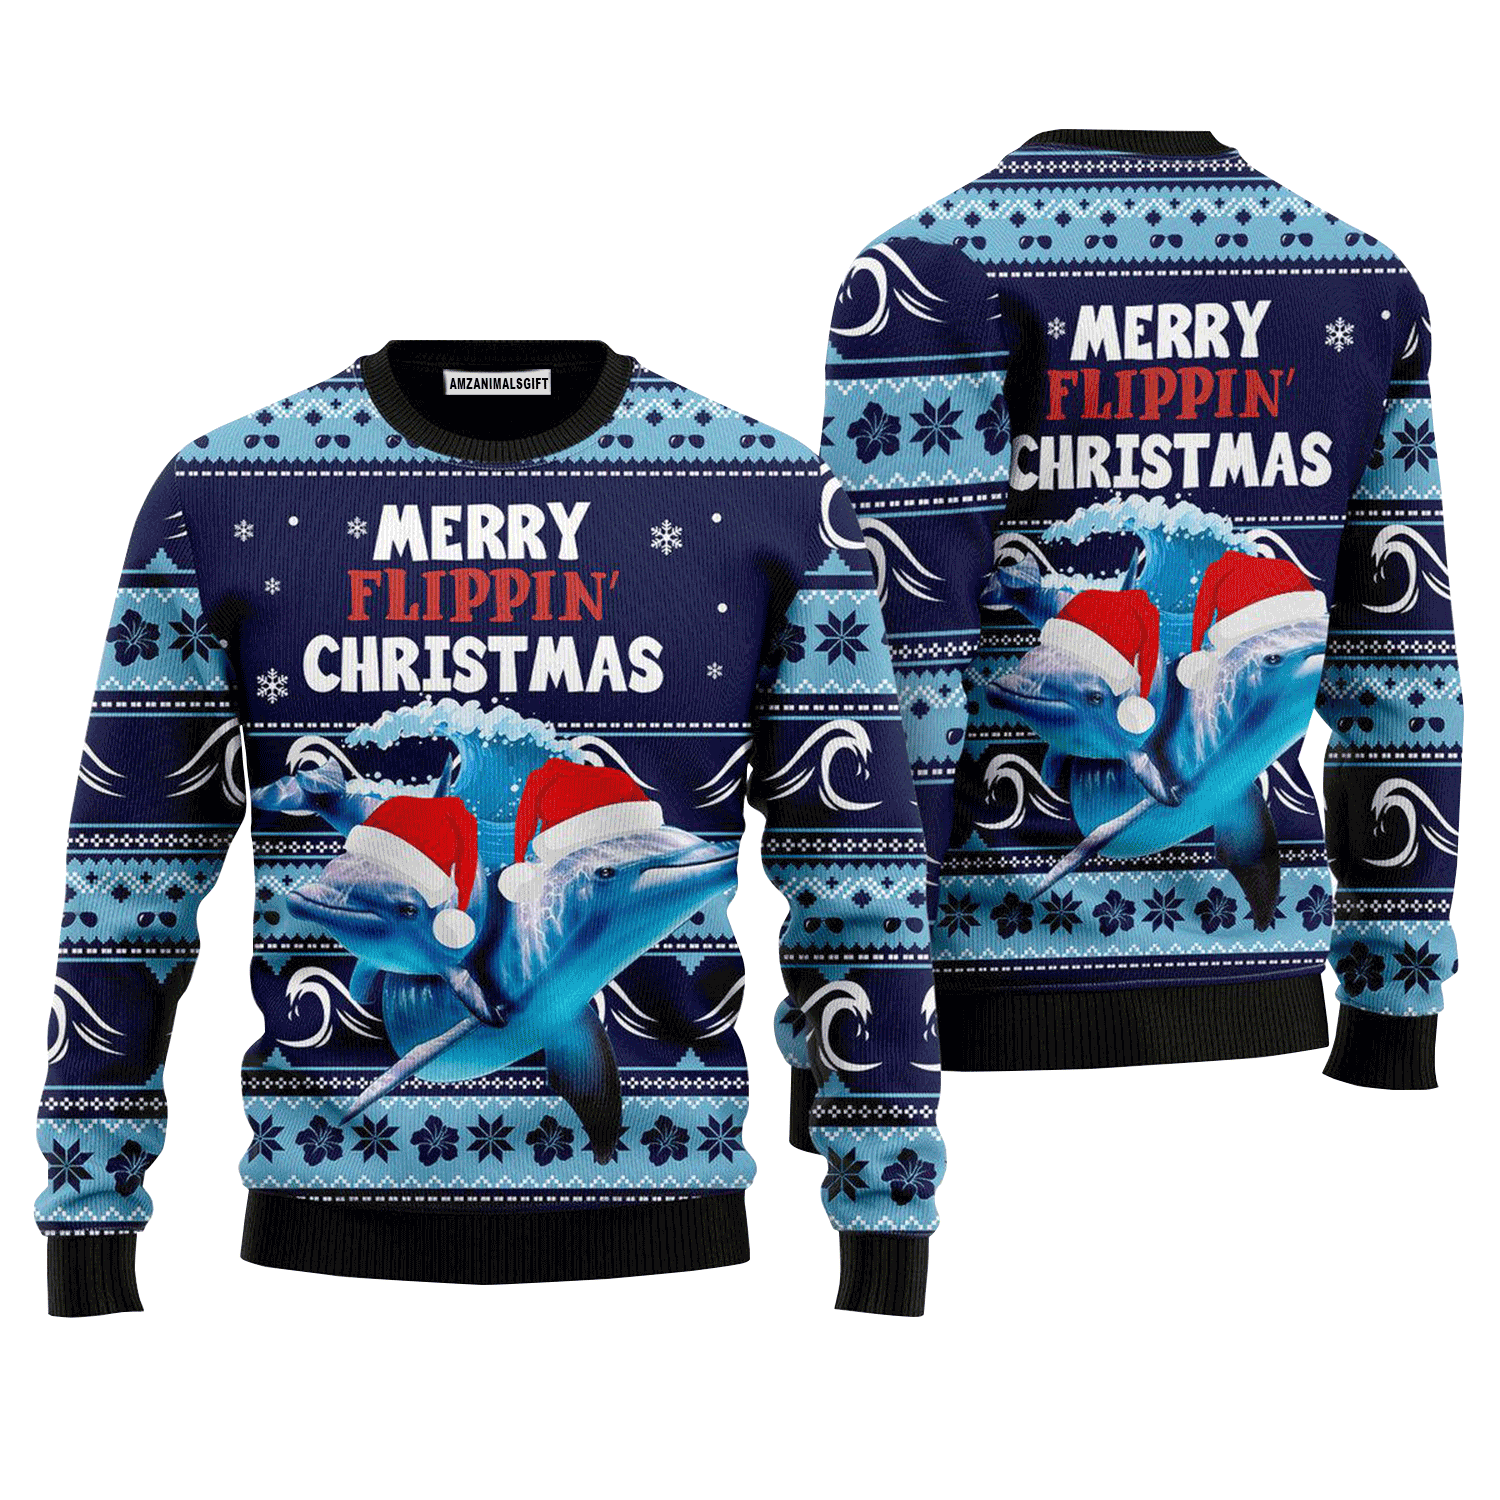 Dolphin Merry Flippin Christmas Sweater, Ugly Sweater For Men & Women, Perfect Outfit For Christmas New Year Autumn Winter